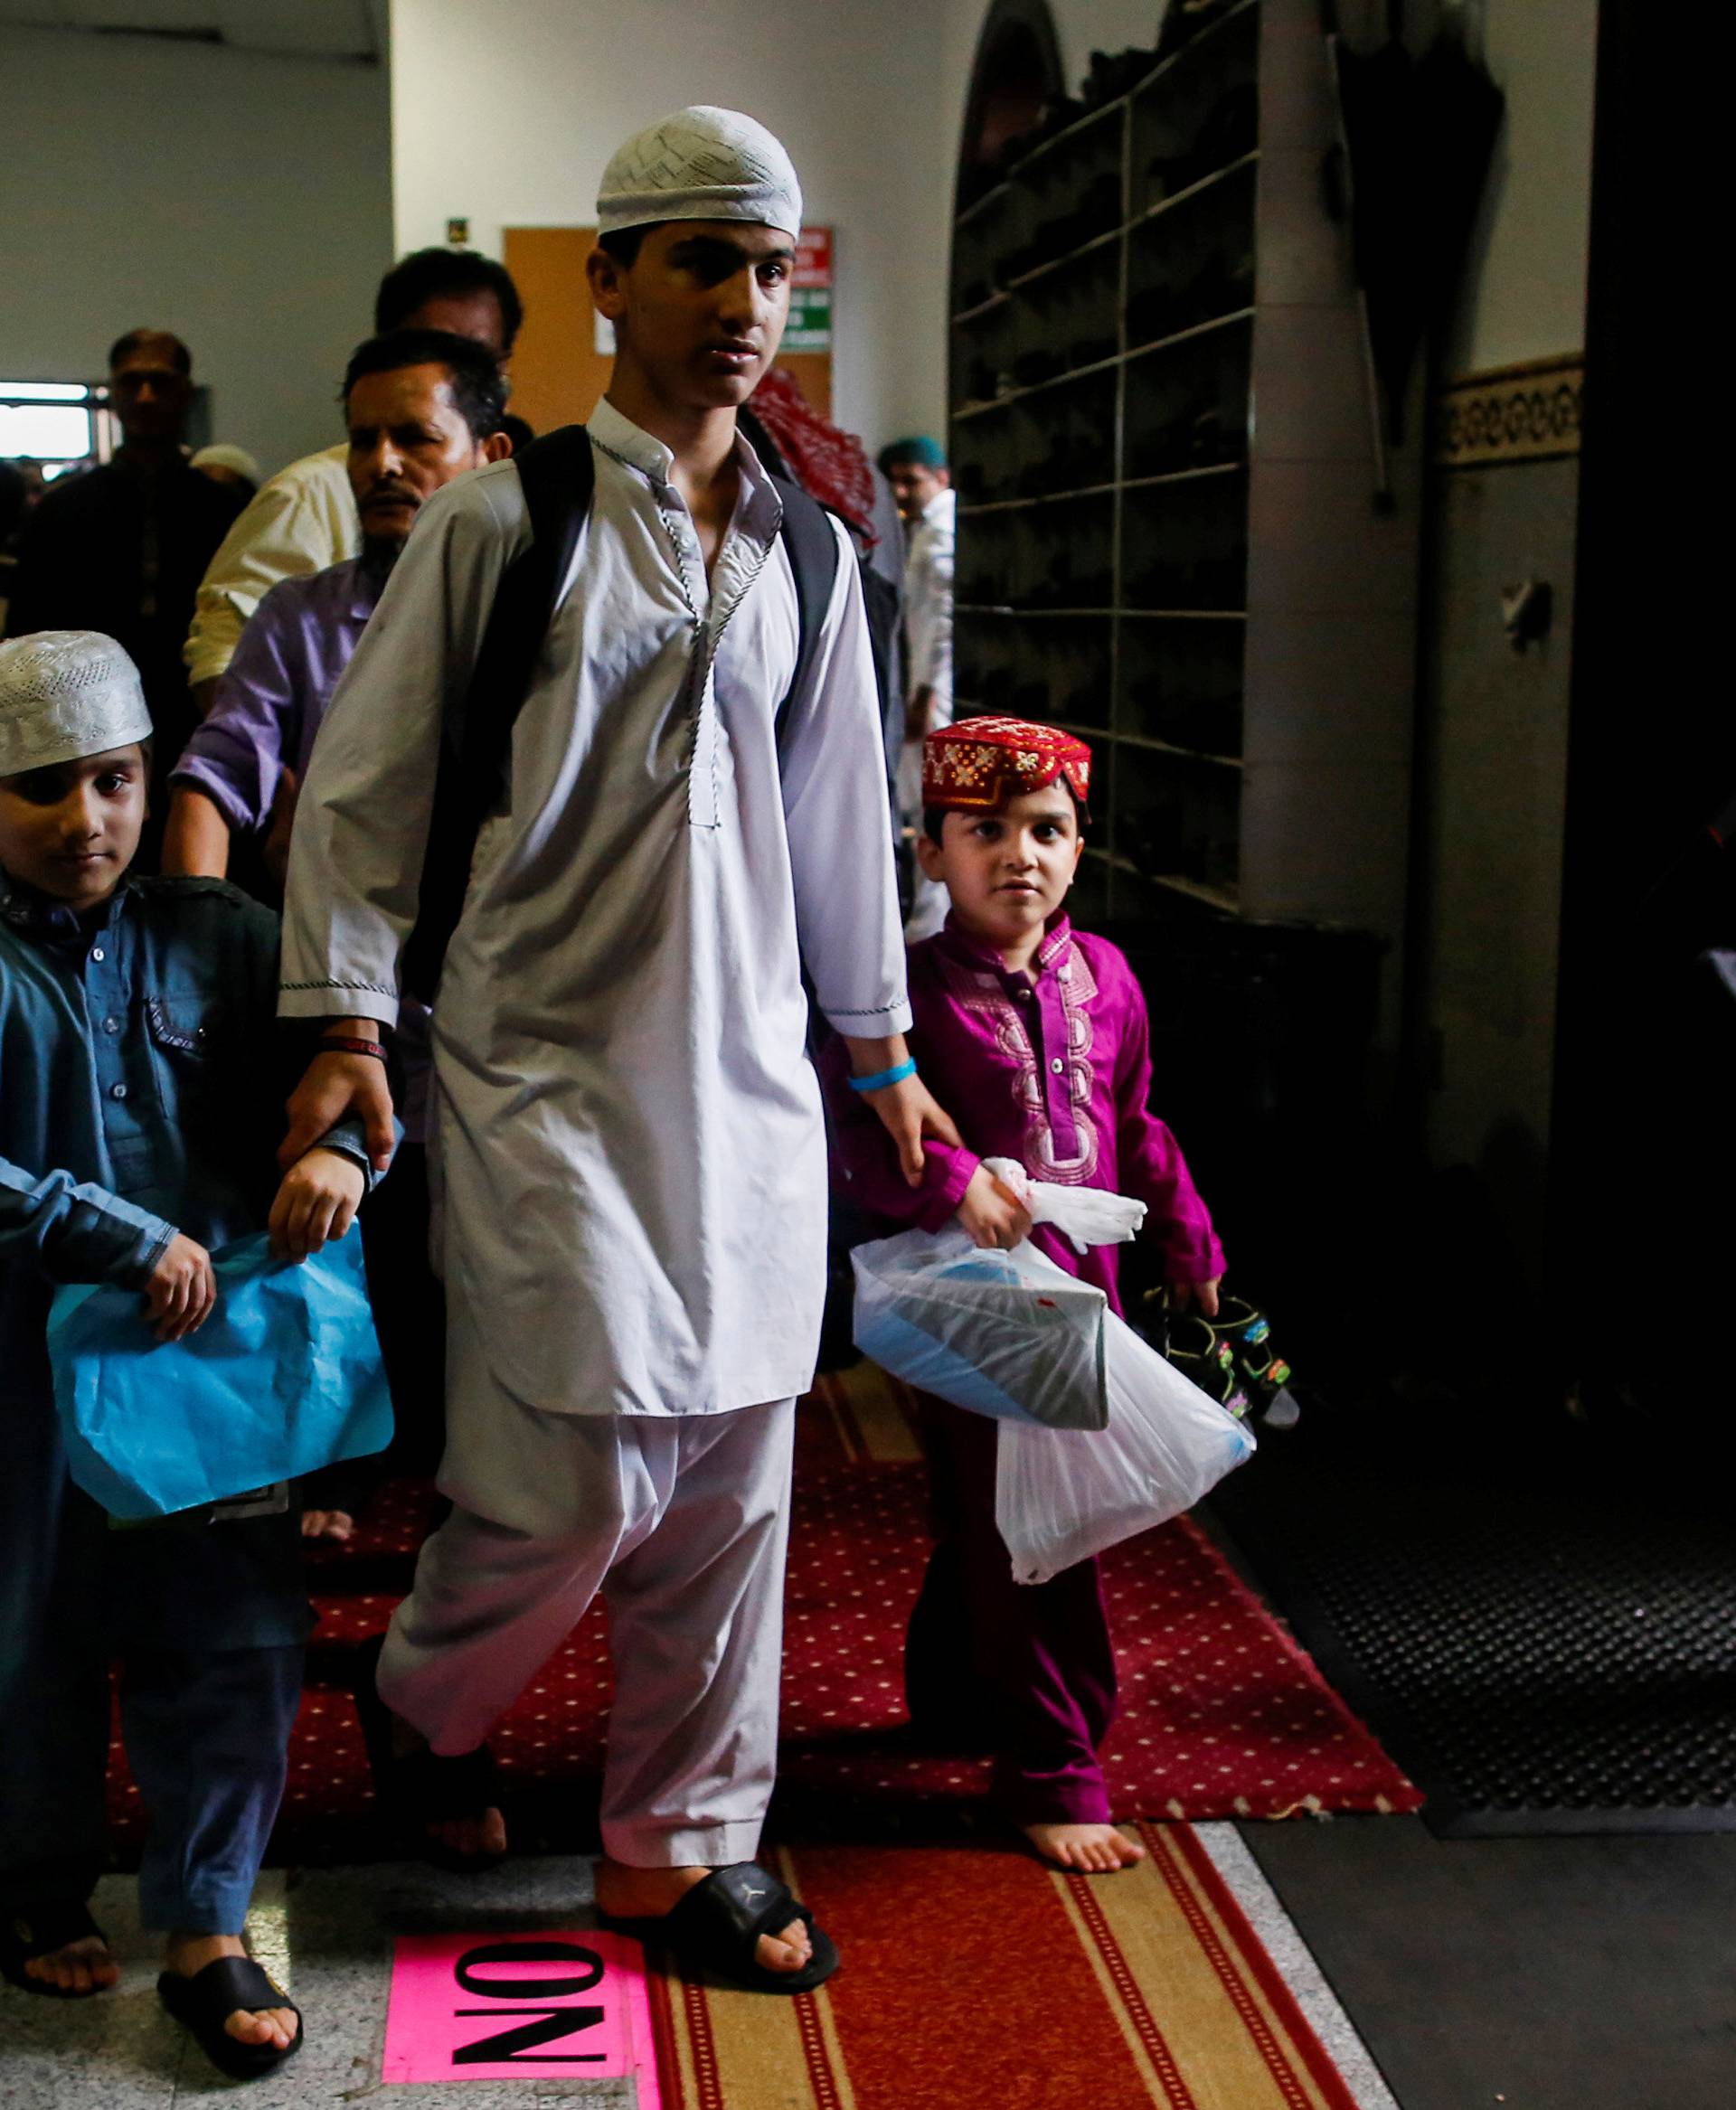 Community members attend prayers inside of a mosque before the funeral service of Imam Maulama Akonjee, and Thara Uddin in the Queens borough of New York City